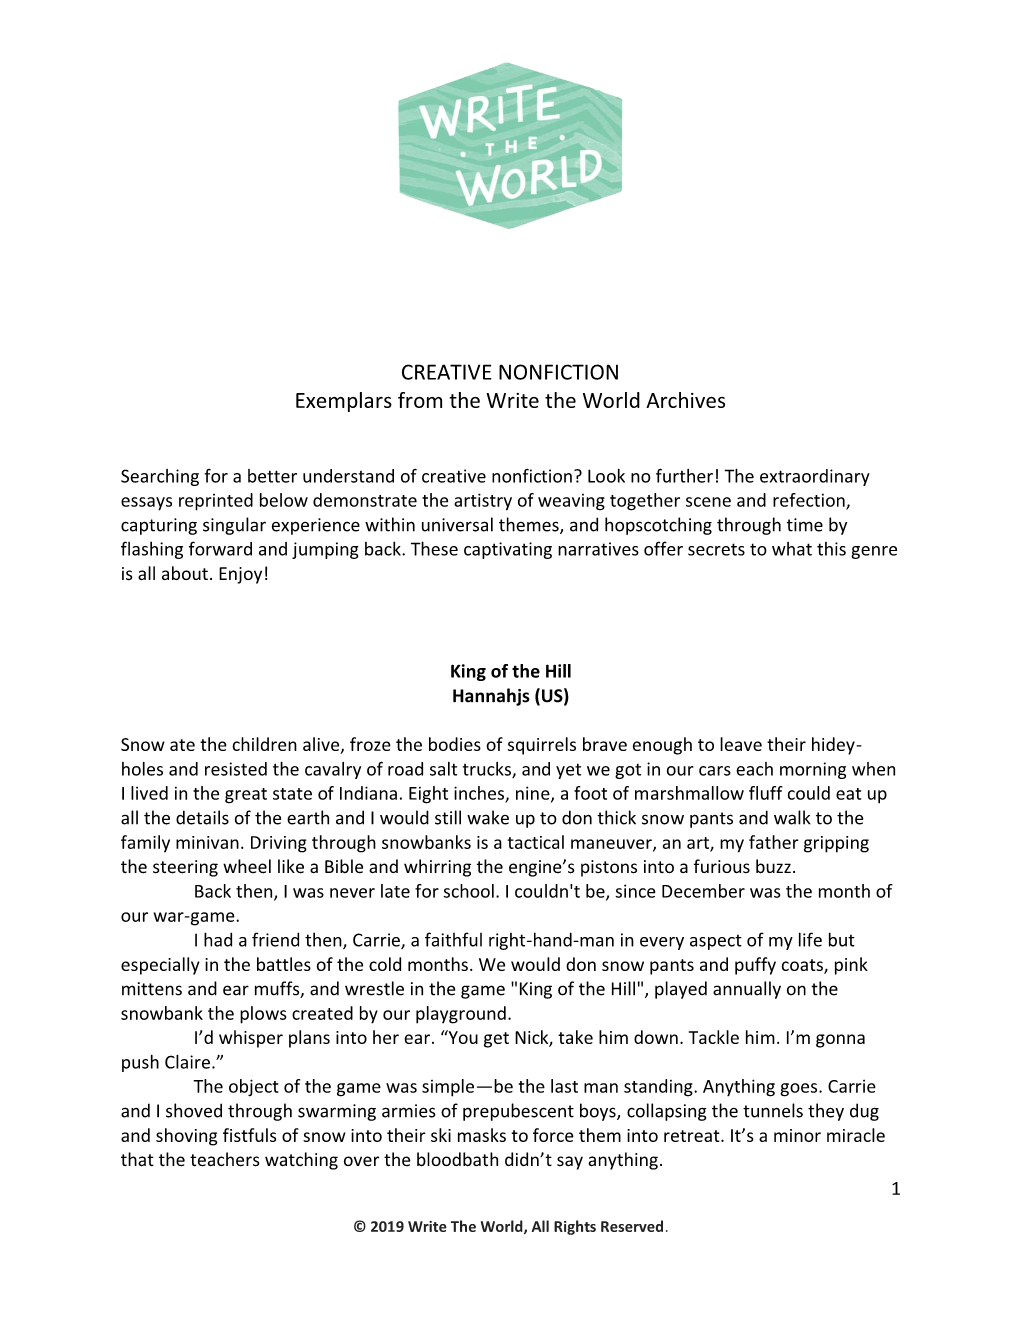 CREATIVE NONFICTION Exemplars from the Write the World Archives